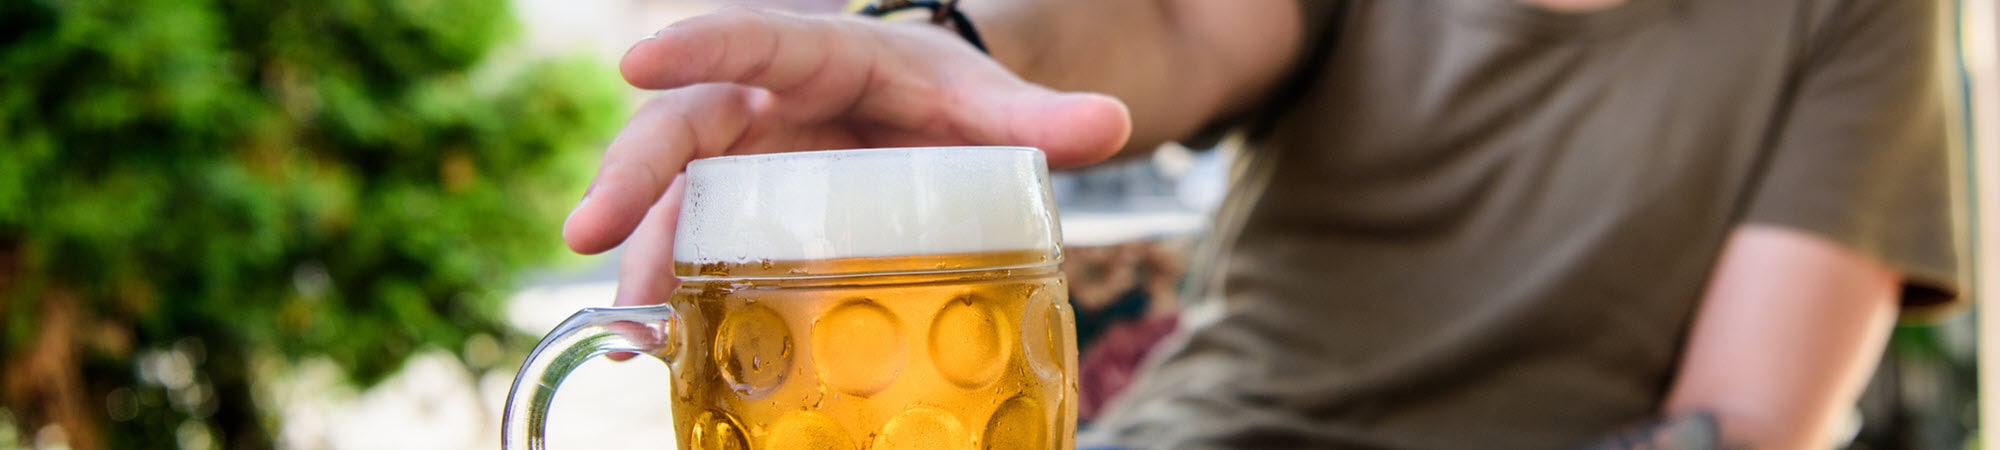 7 Reasons To Drink Beer During The Week - With Facts | Beer Is OK